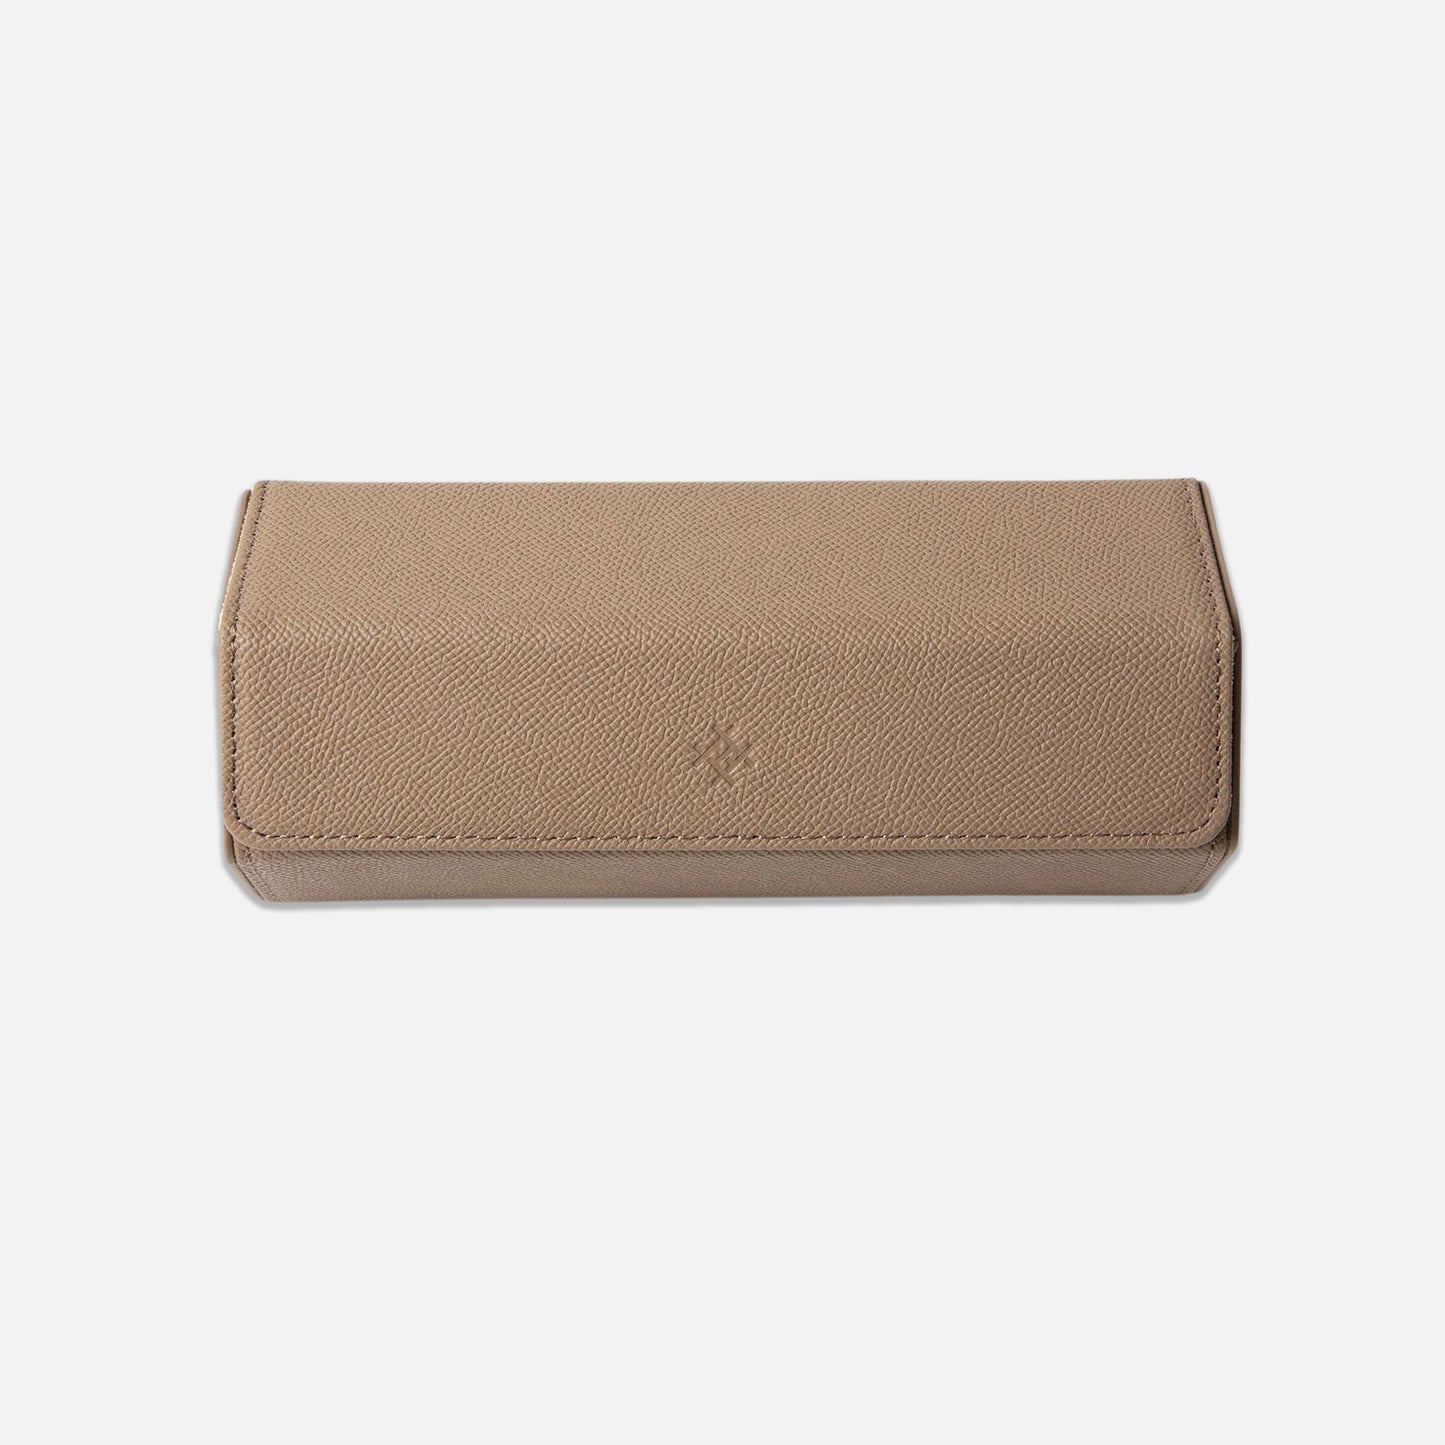 The Hex 2.0 Leather Three Watch Roll in Tan